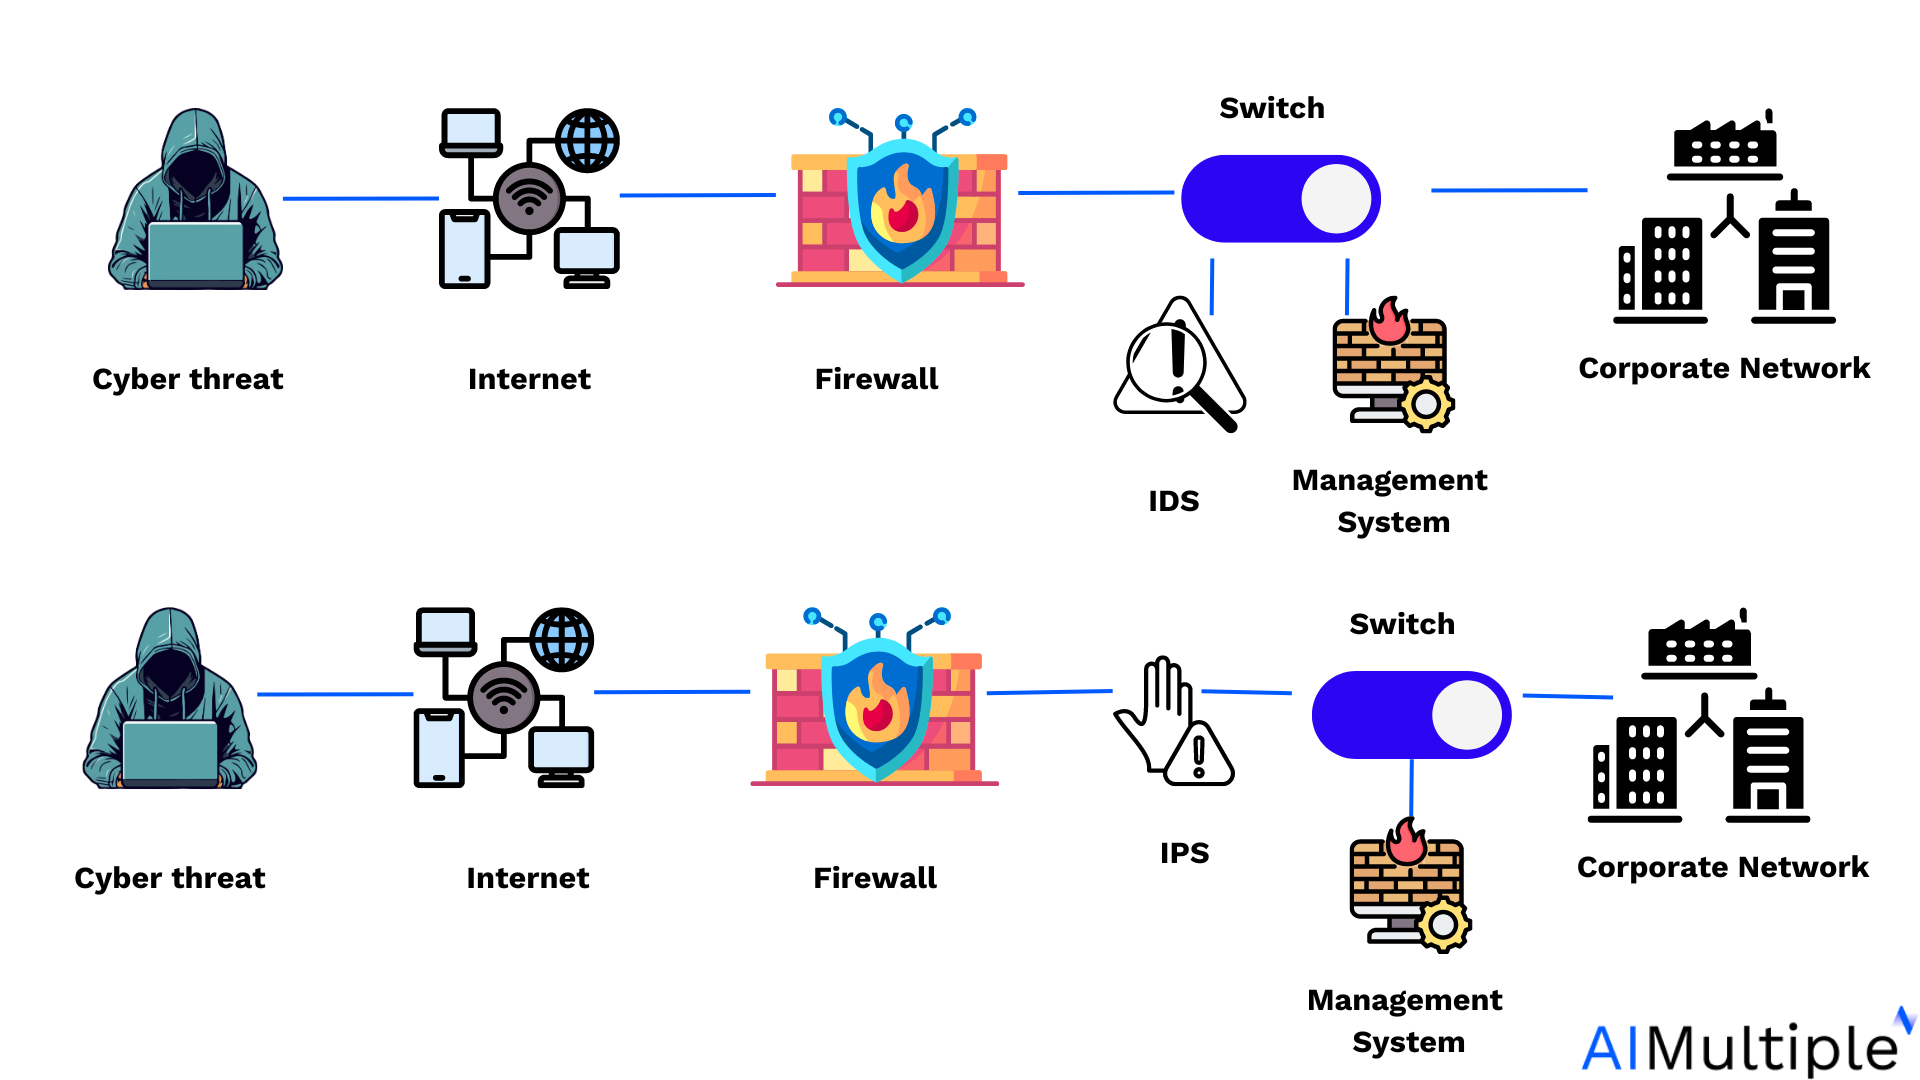 This image shows the difference between IDS and IPS which are features of open source firewall management tool